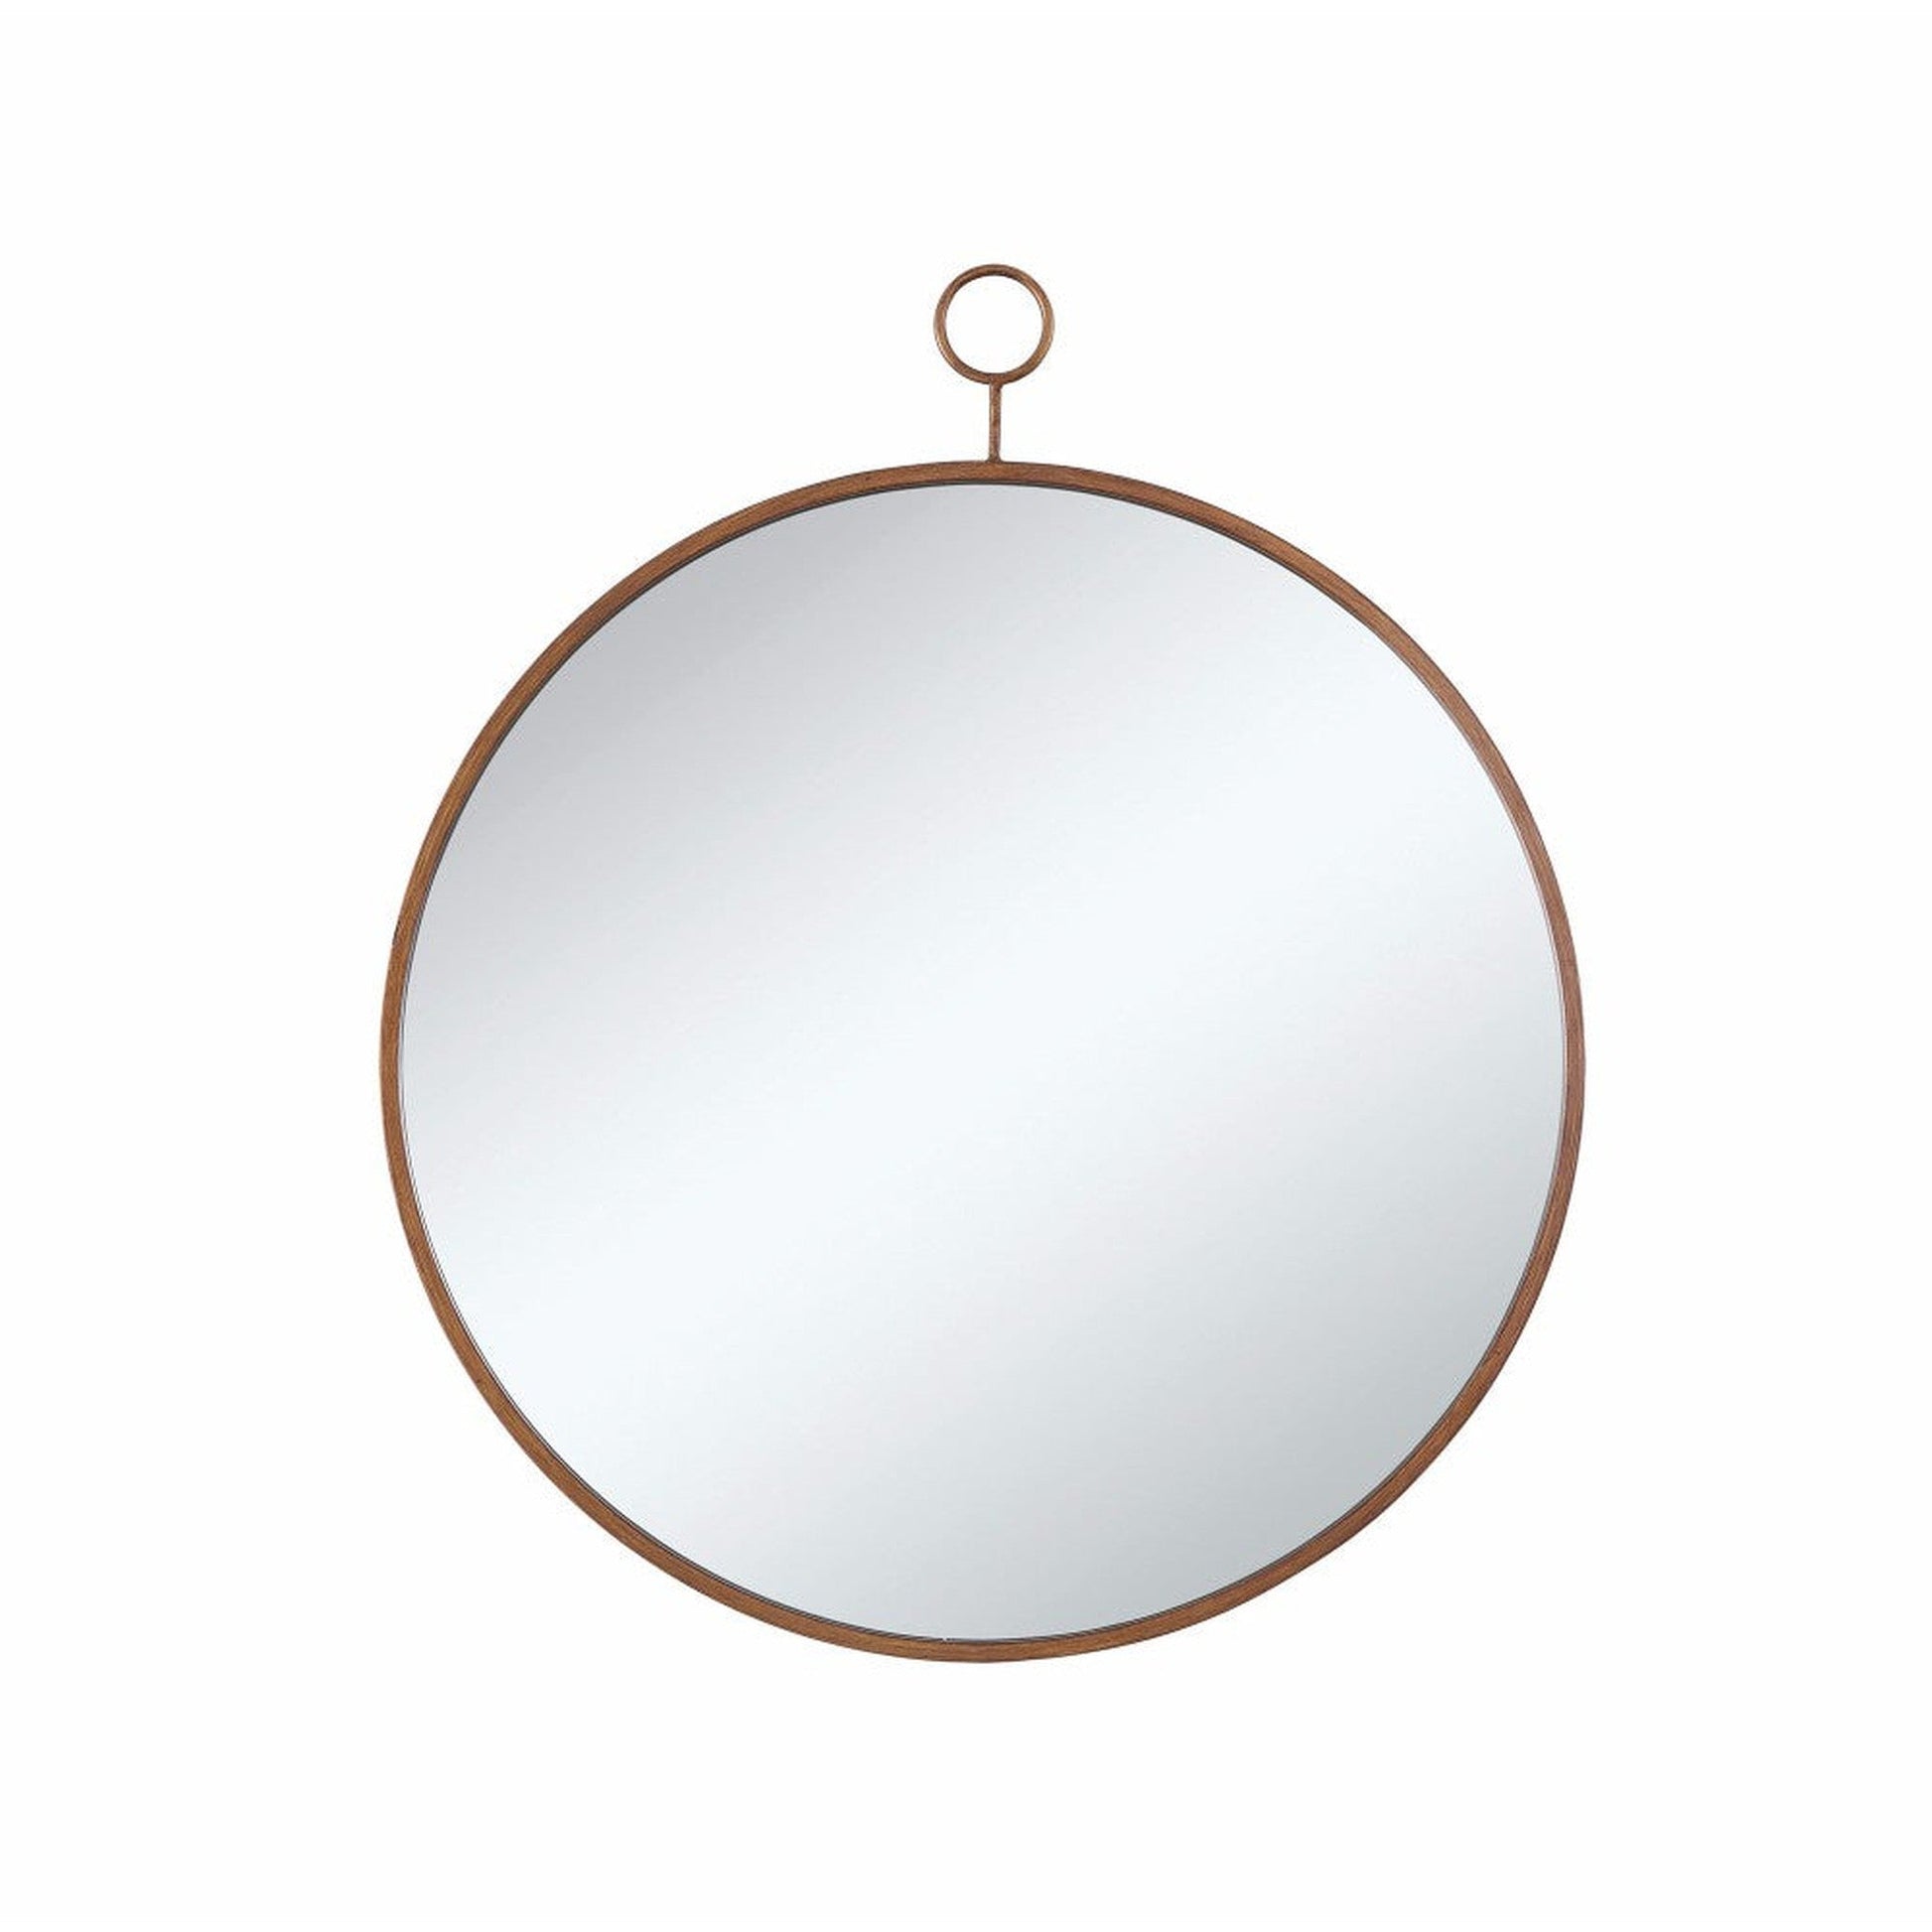 Benzara Gold And Silver Round Wall Mirror With A Loop Hanger